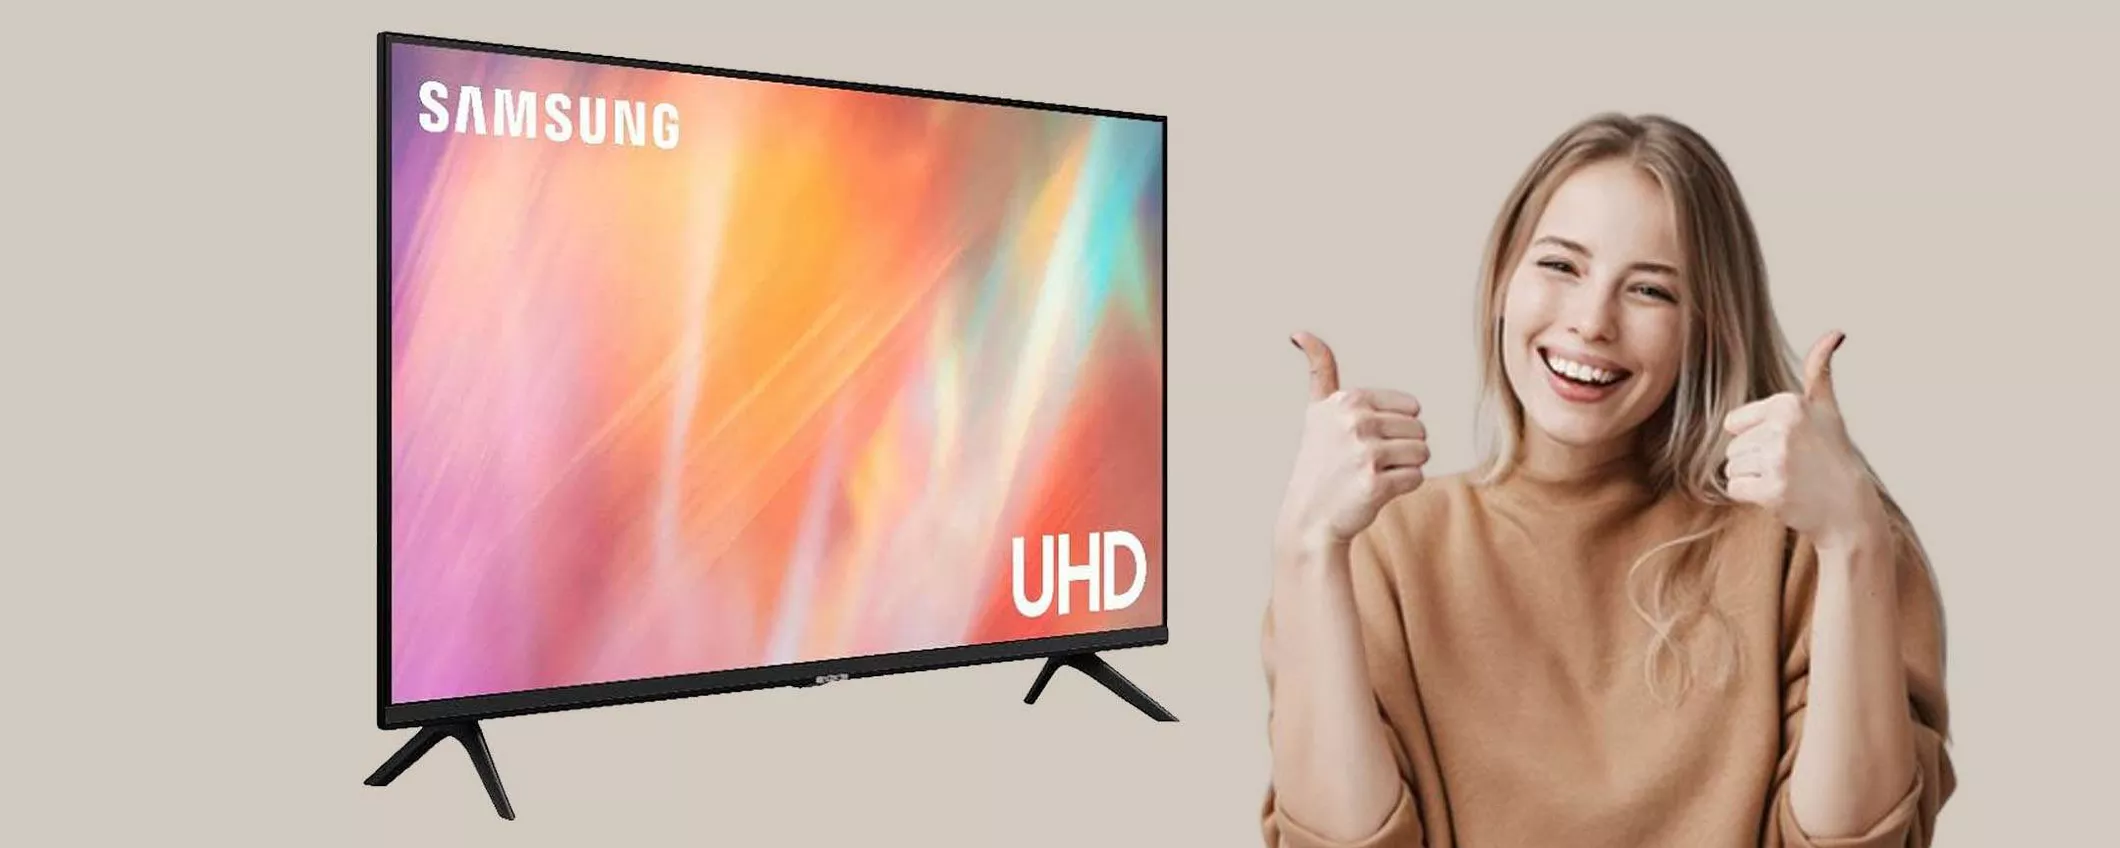 TV Samsung Smart Crystal UHD 4K: sconto WOW del 19% (anche a rate)